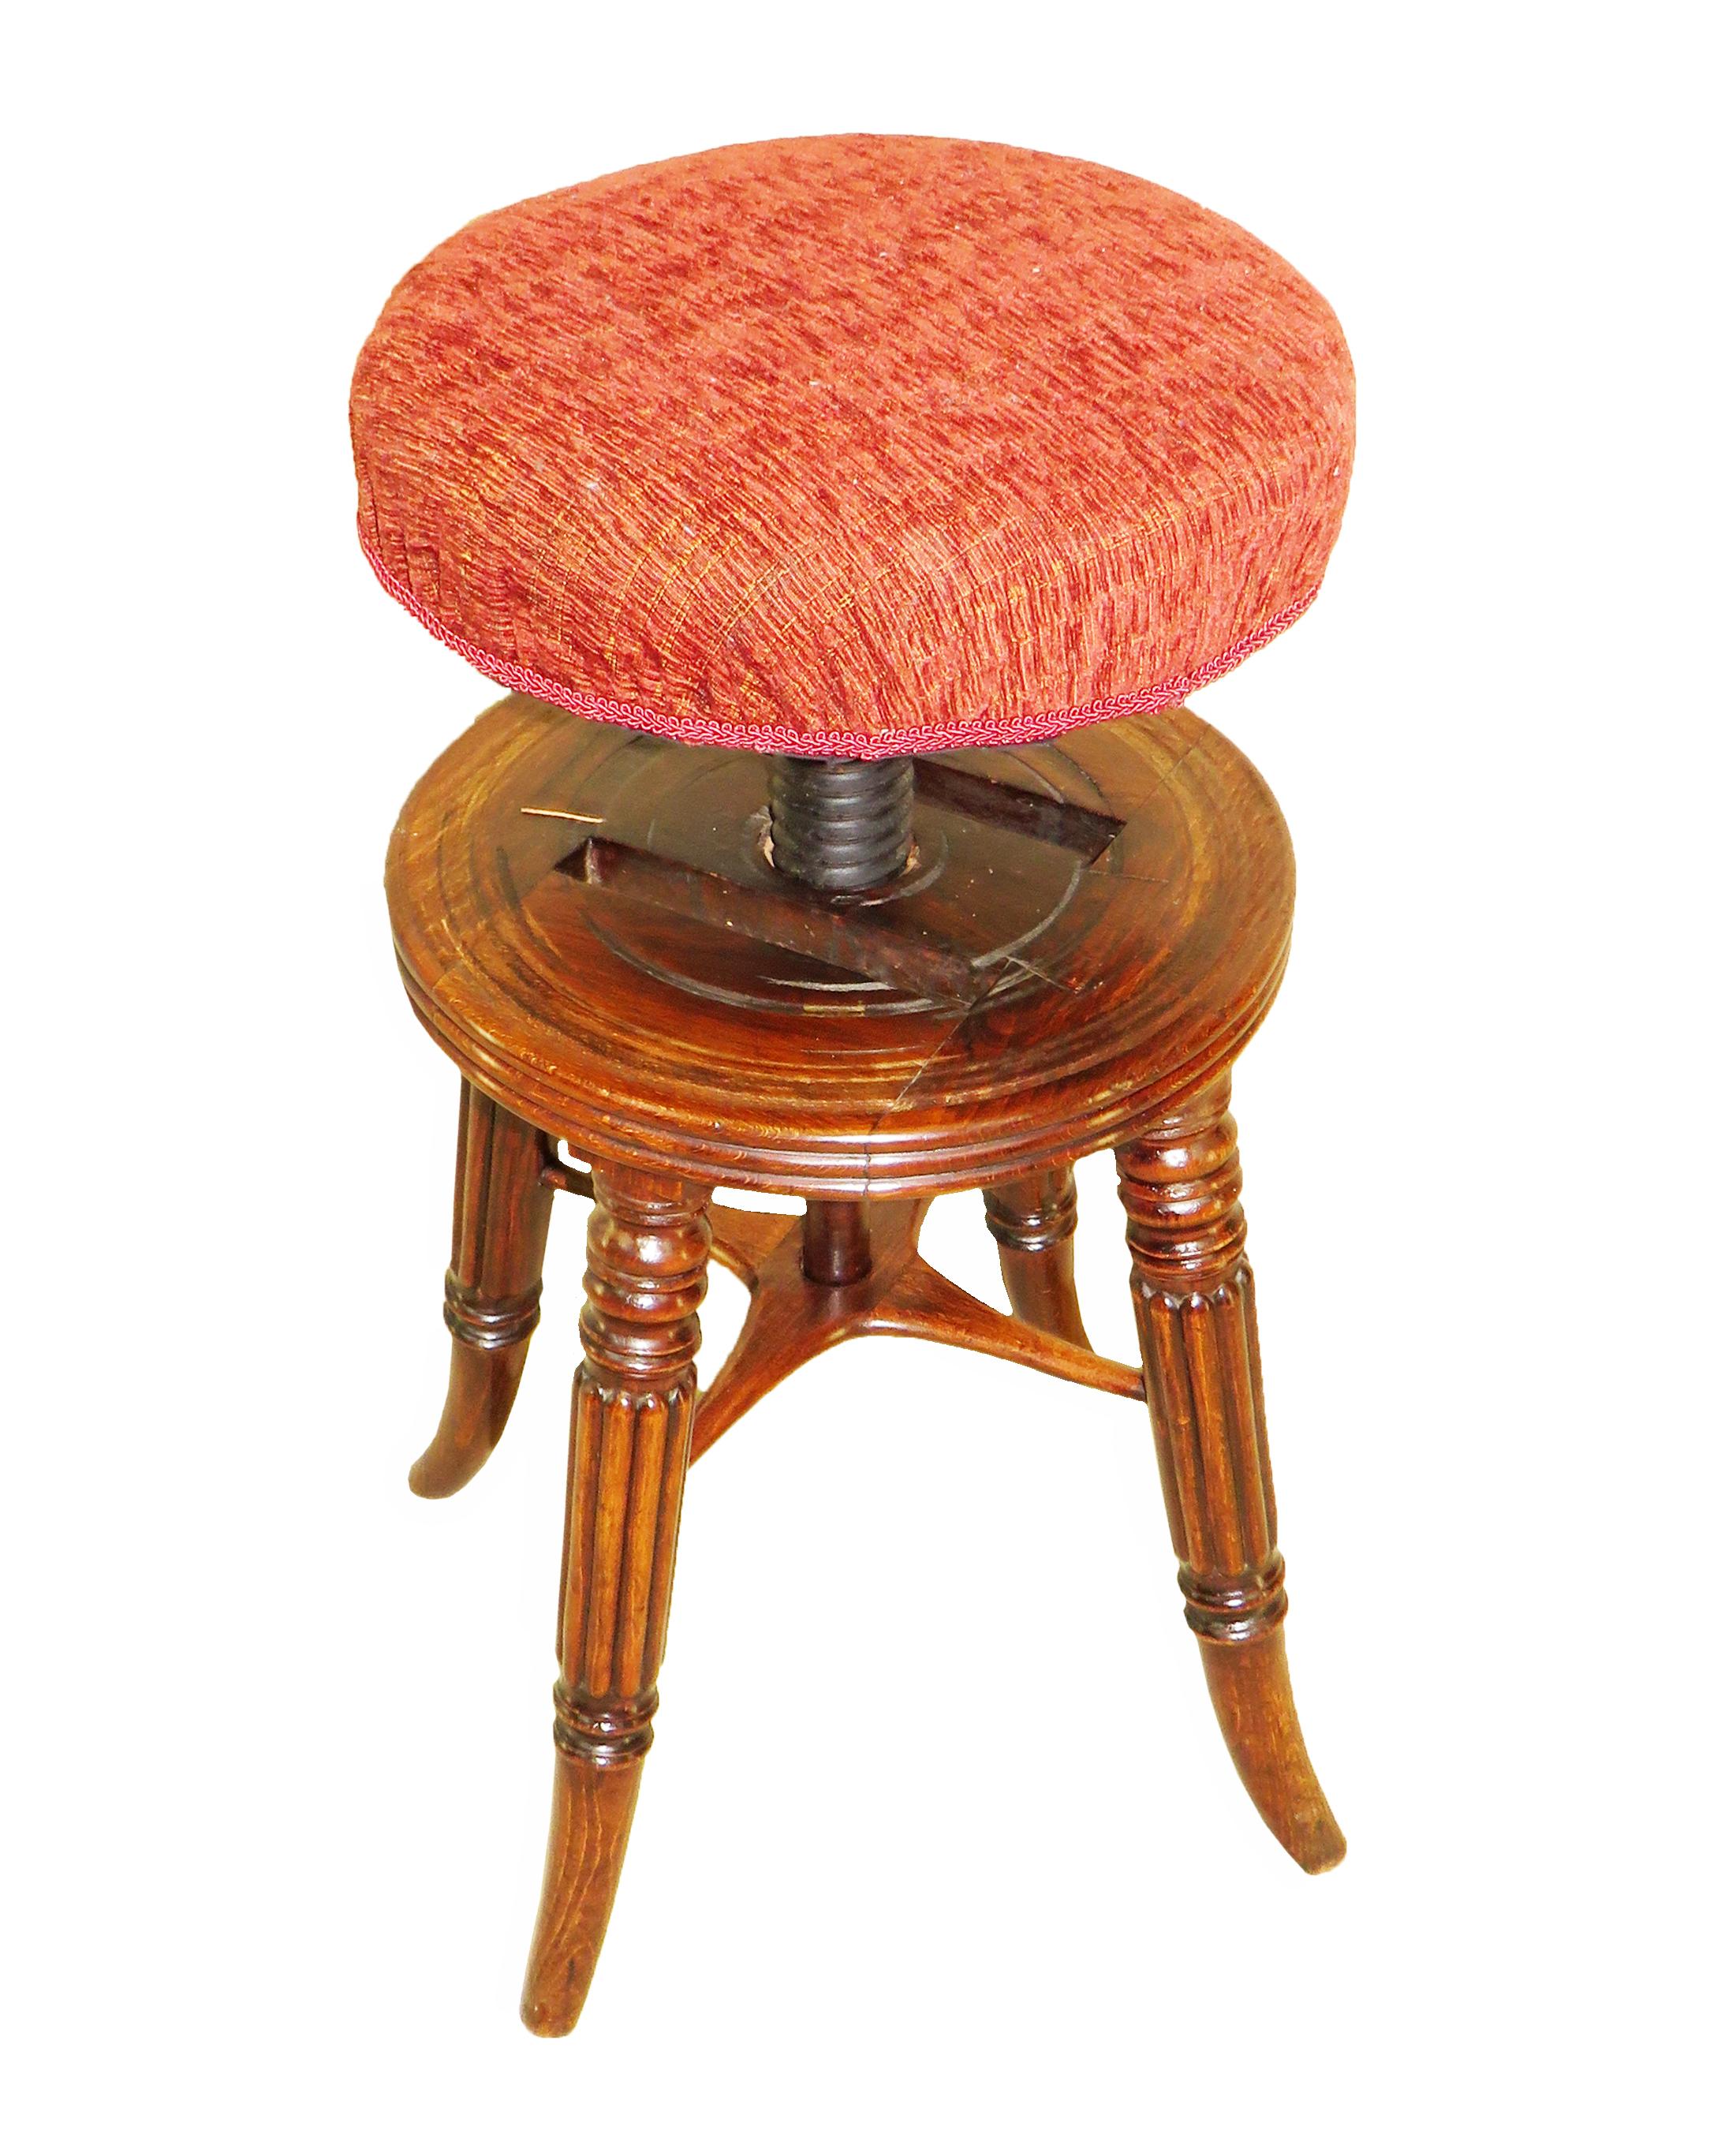 A fine quality regency period mahogany piano stool,
in the manner of Gillows, having circular adjustable
seat, over elegant turned and reeded legs terminating
on elegant swept feet united by cross stretcher

(This charming piano stool, which is